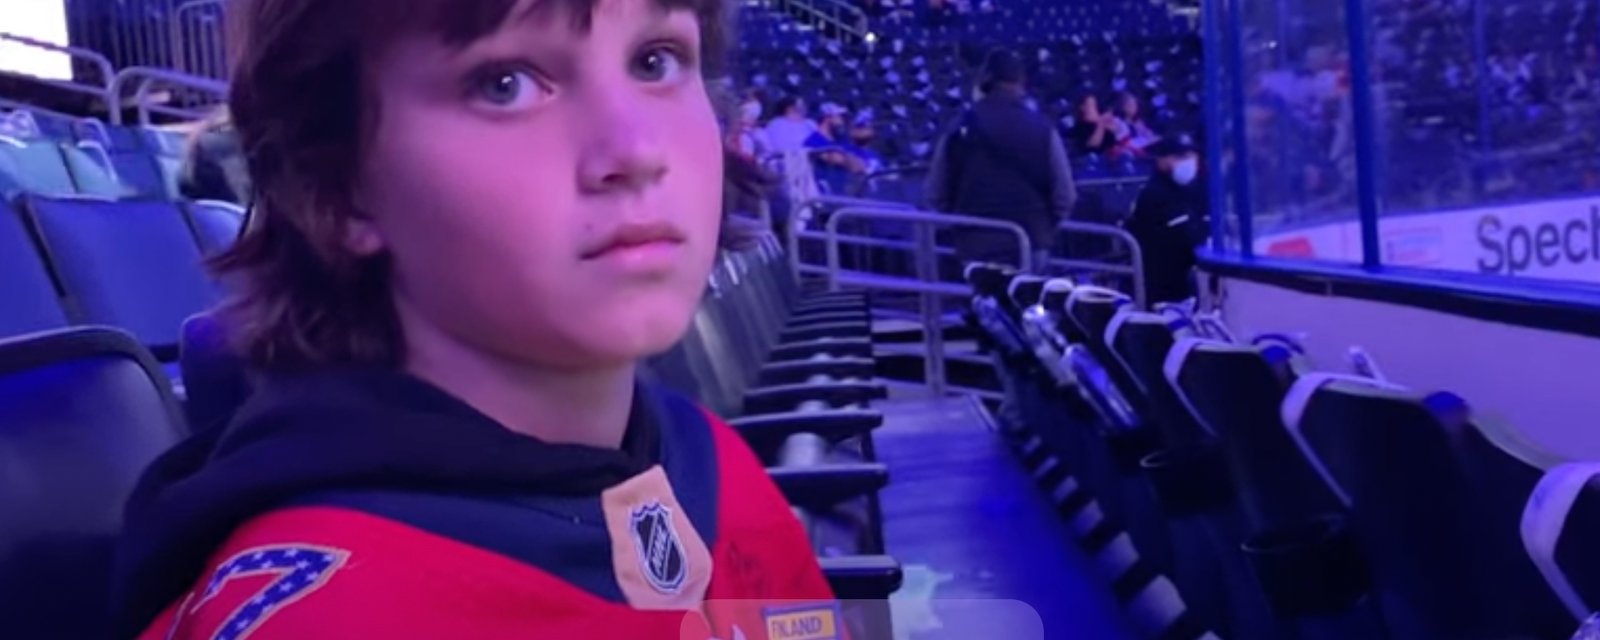 Lightning changes arena rules following shameful altercation will 11-year-old kid! 